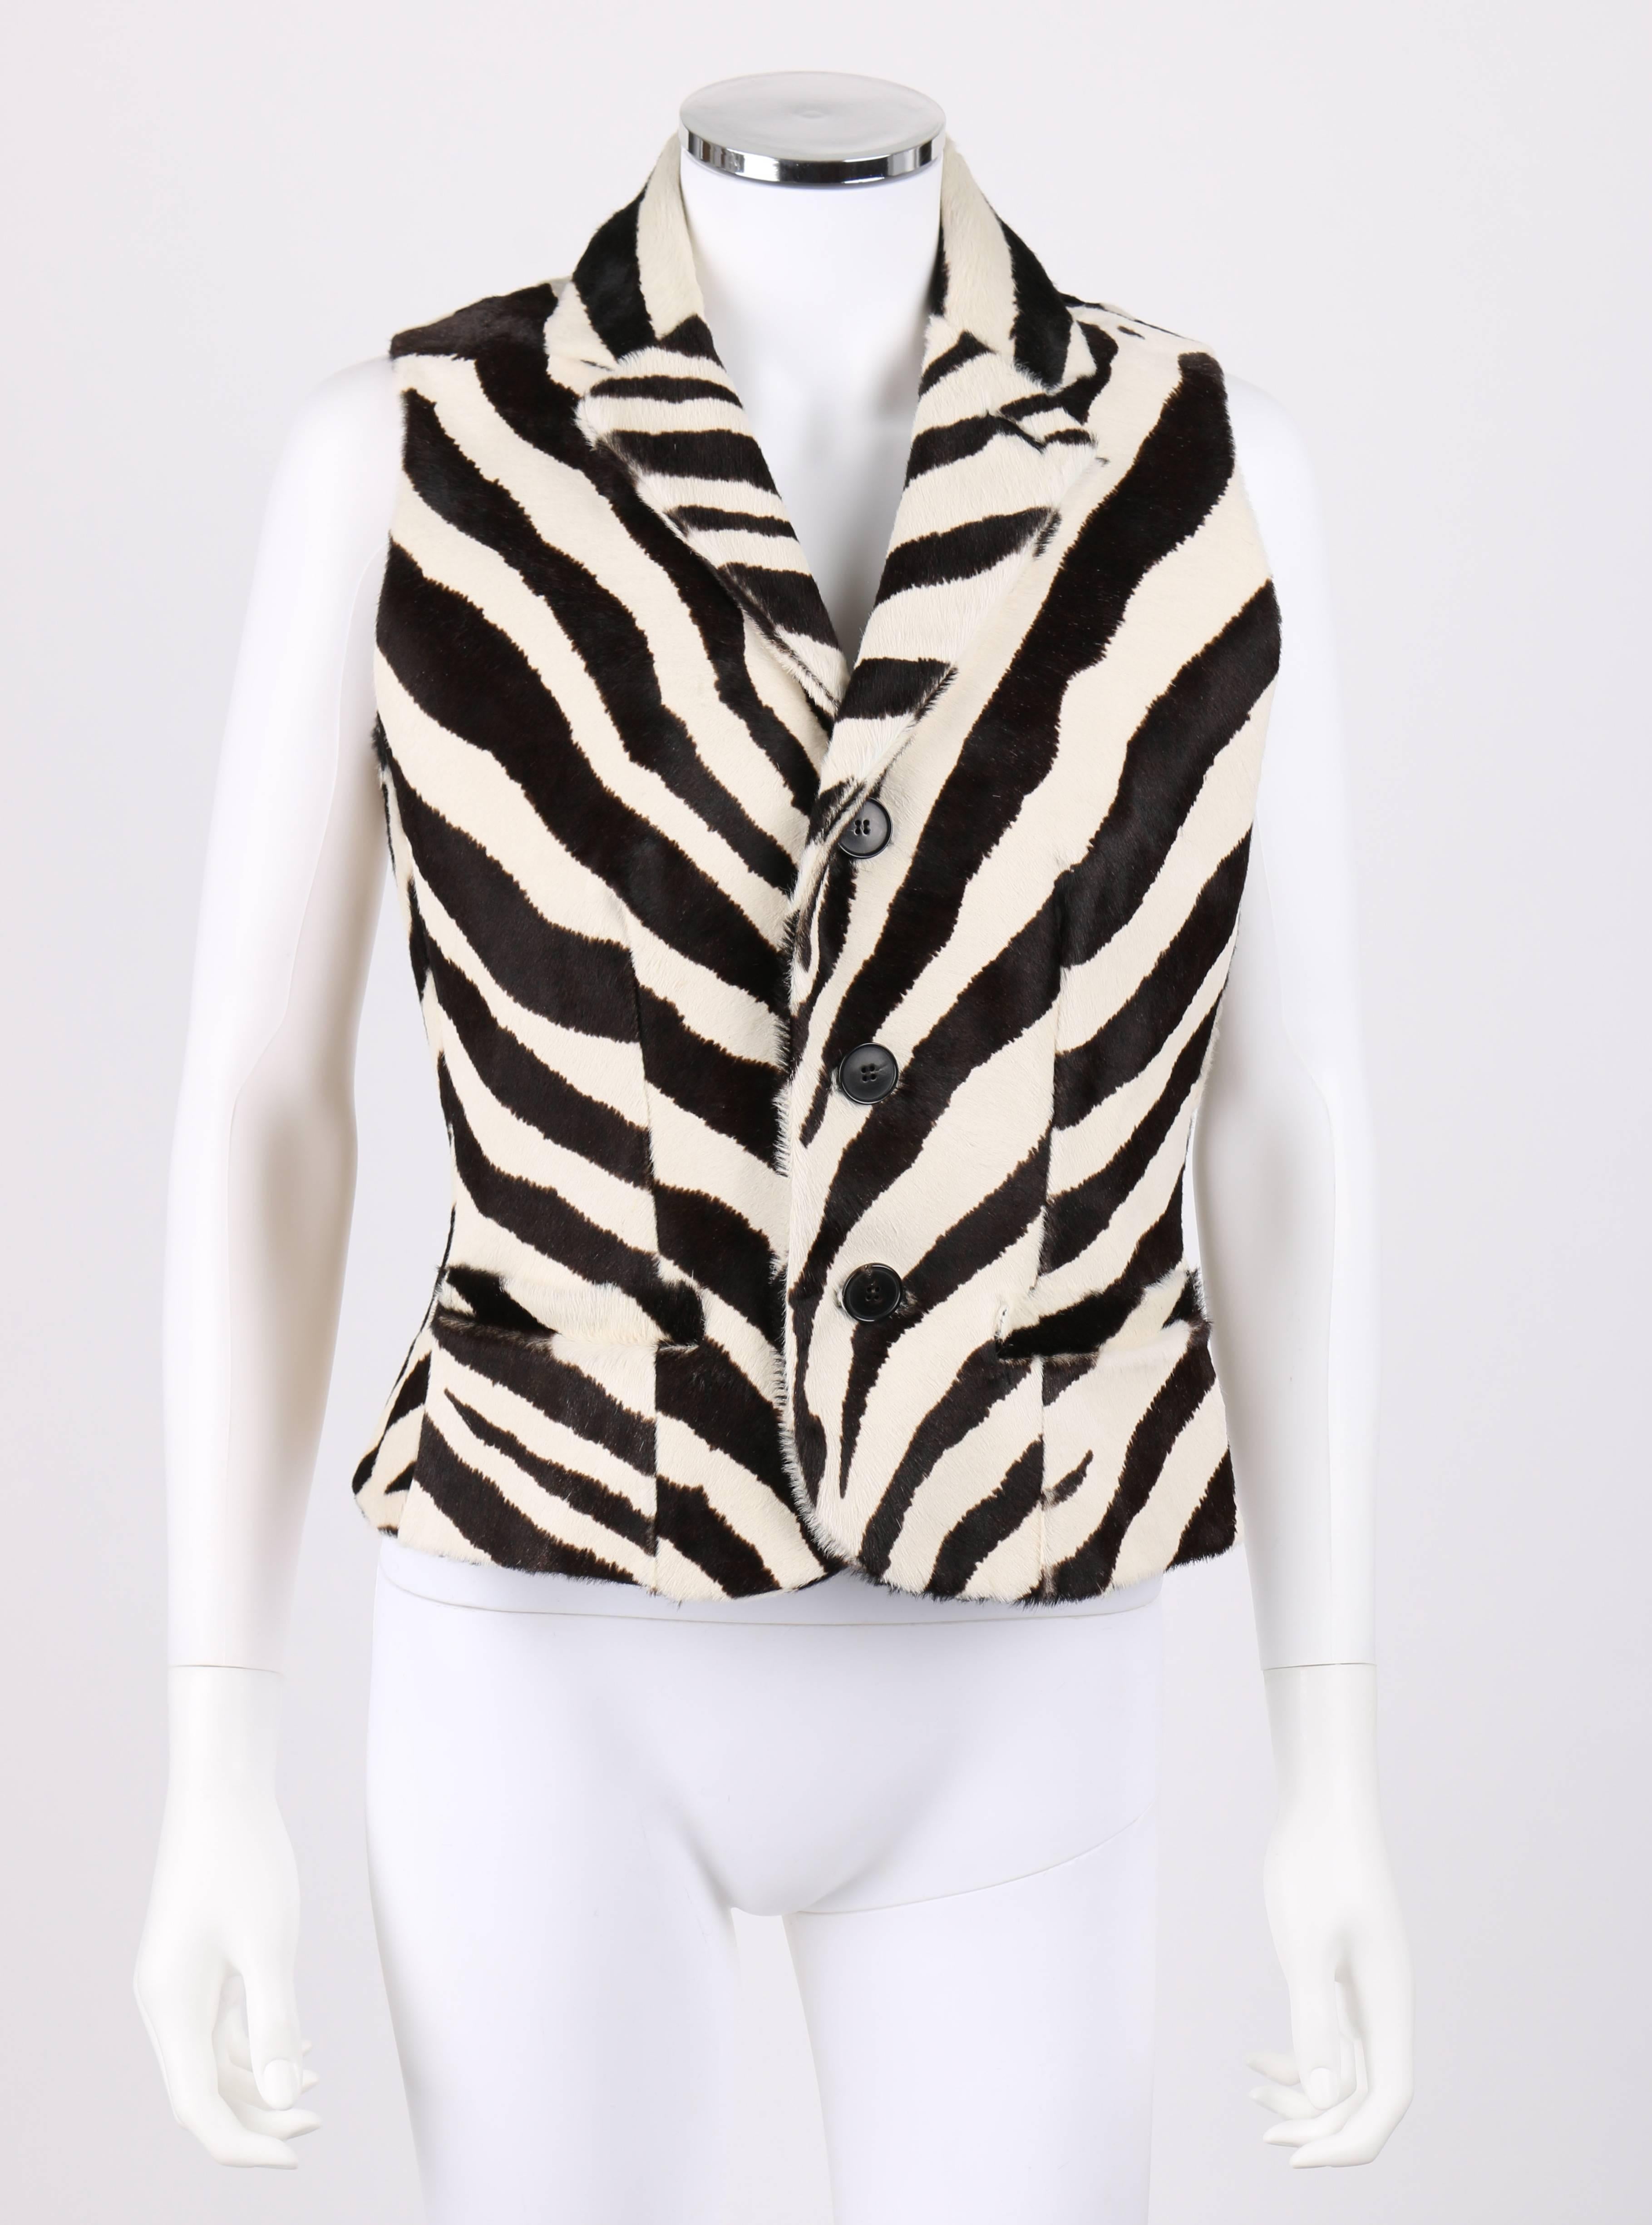 Ralph Lauren Collection (purple label) zebra print calfskin vest. New Old Stock. Ivory and brown zebra stripe printed calf hair fur. Notched lapel collar. Three center front button closures. Single button hole detail at left lapel. Two front single